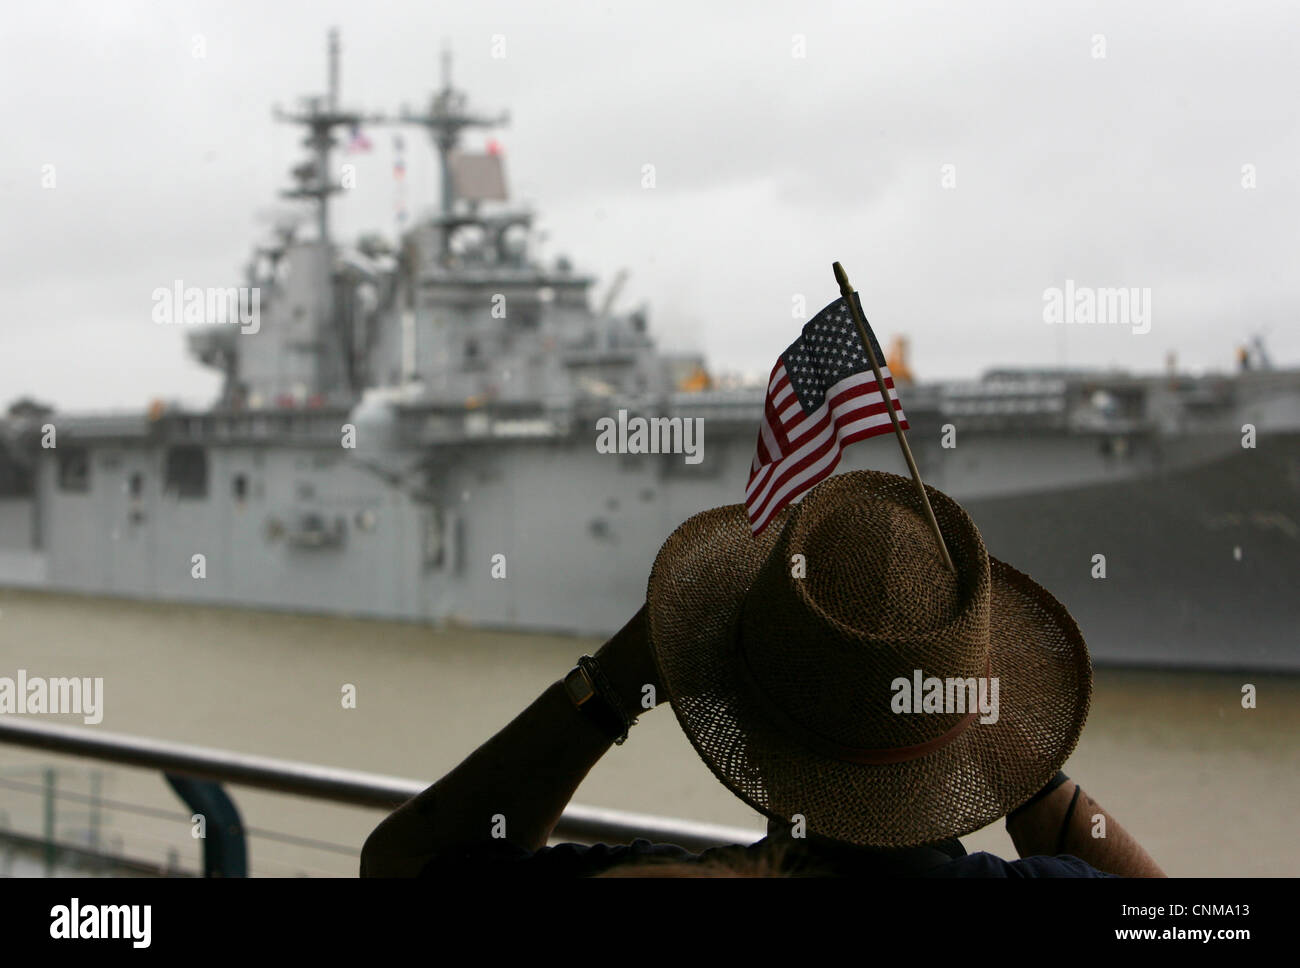 A woman looks through binoculars as the multipurpose amphibious assault ship USS Wasp (LHD 1) arrives for The War of 1812 Bicentennial Commemoration in New Orleans. The event is part of a series of city visits by the Navy, Coast Guard, Marine Corps and Operation Sail beginning in April 2012 and concluding in 2015. New Orleans is the first and the last city visit in the series. Stock Photo